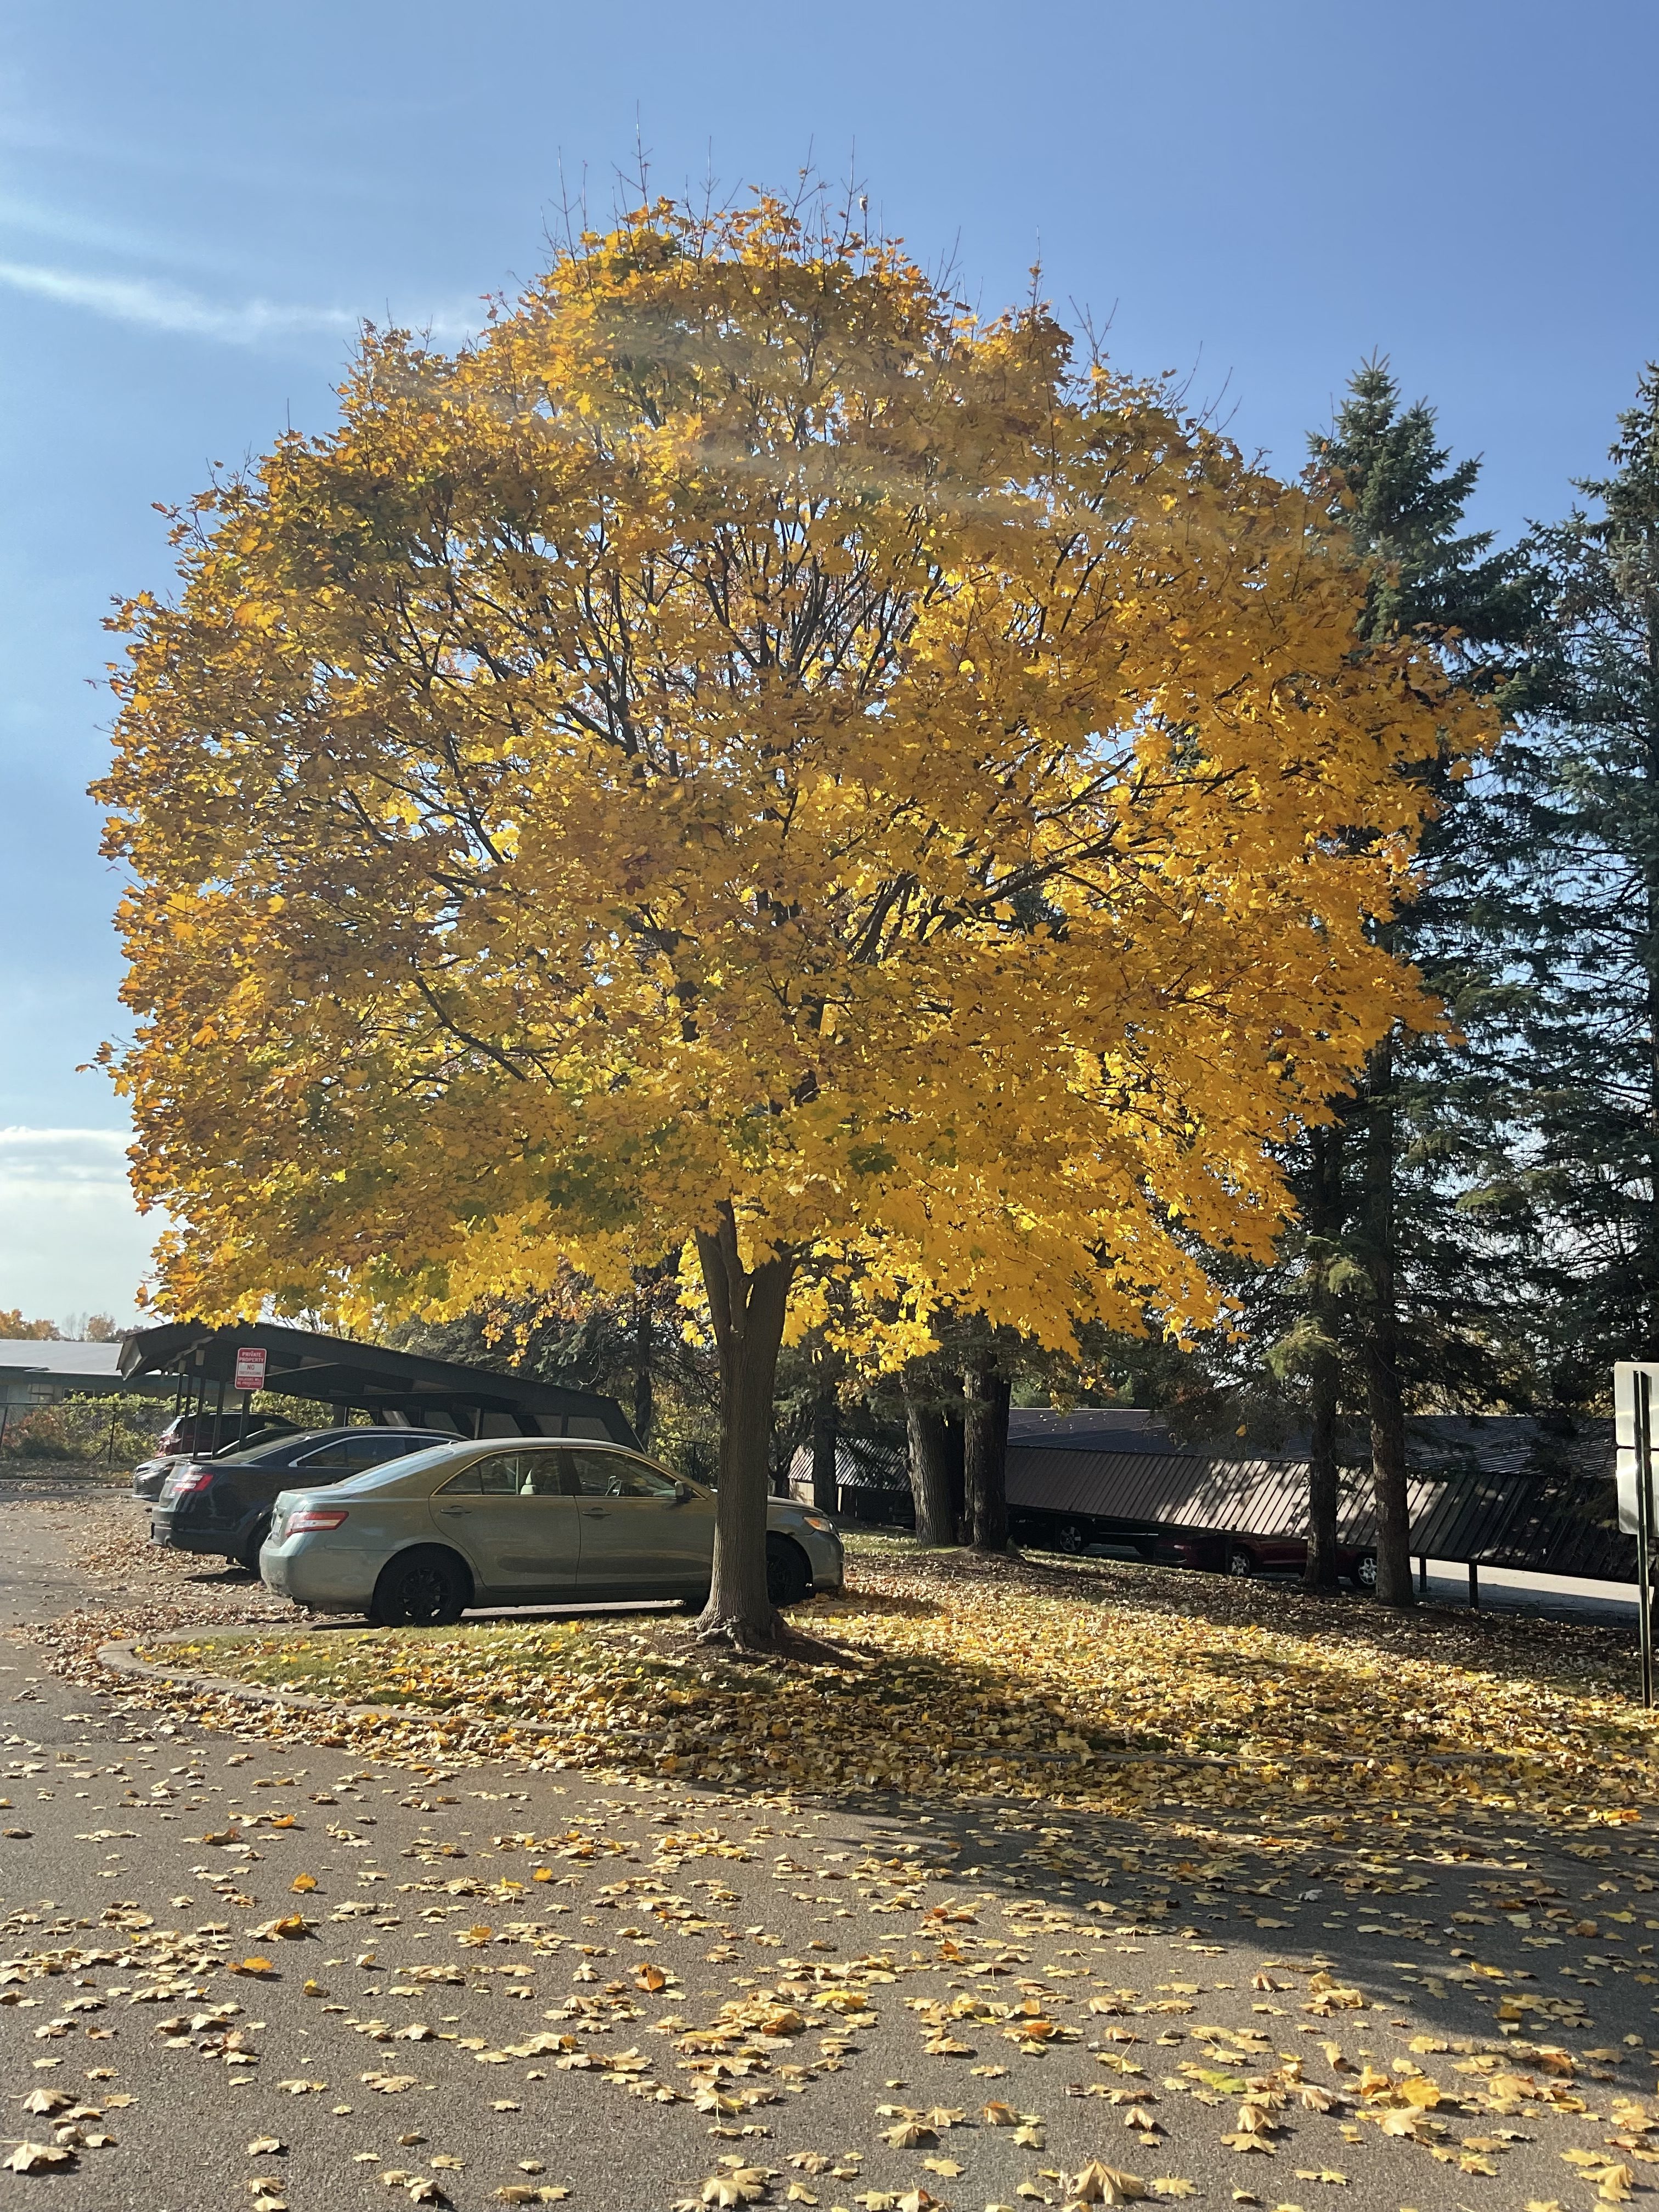 A photo of a tree with yellow leaves, taken with the iPad (2022).